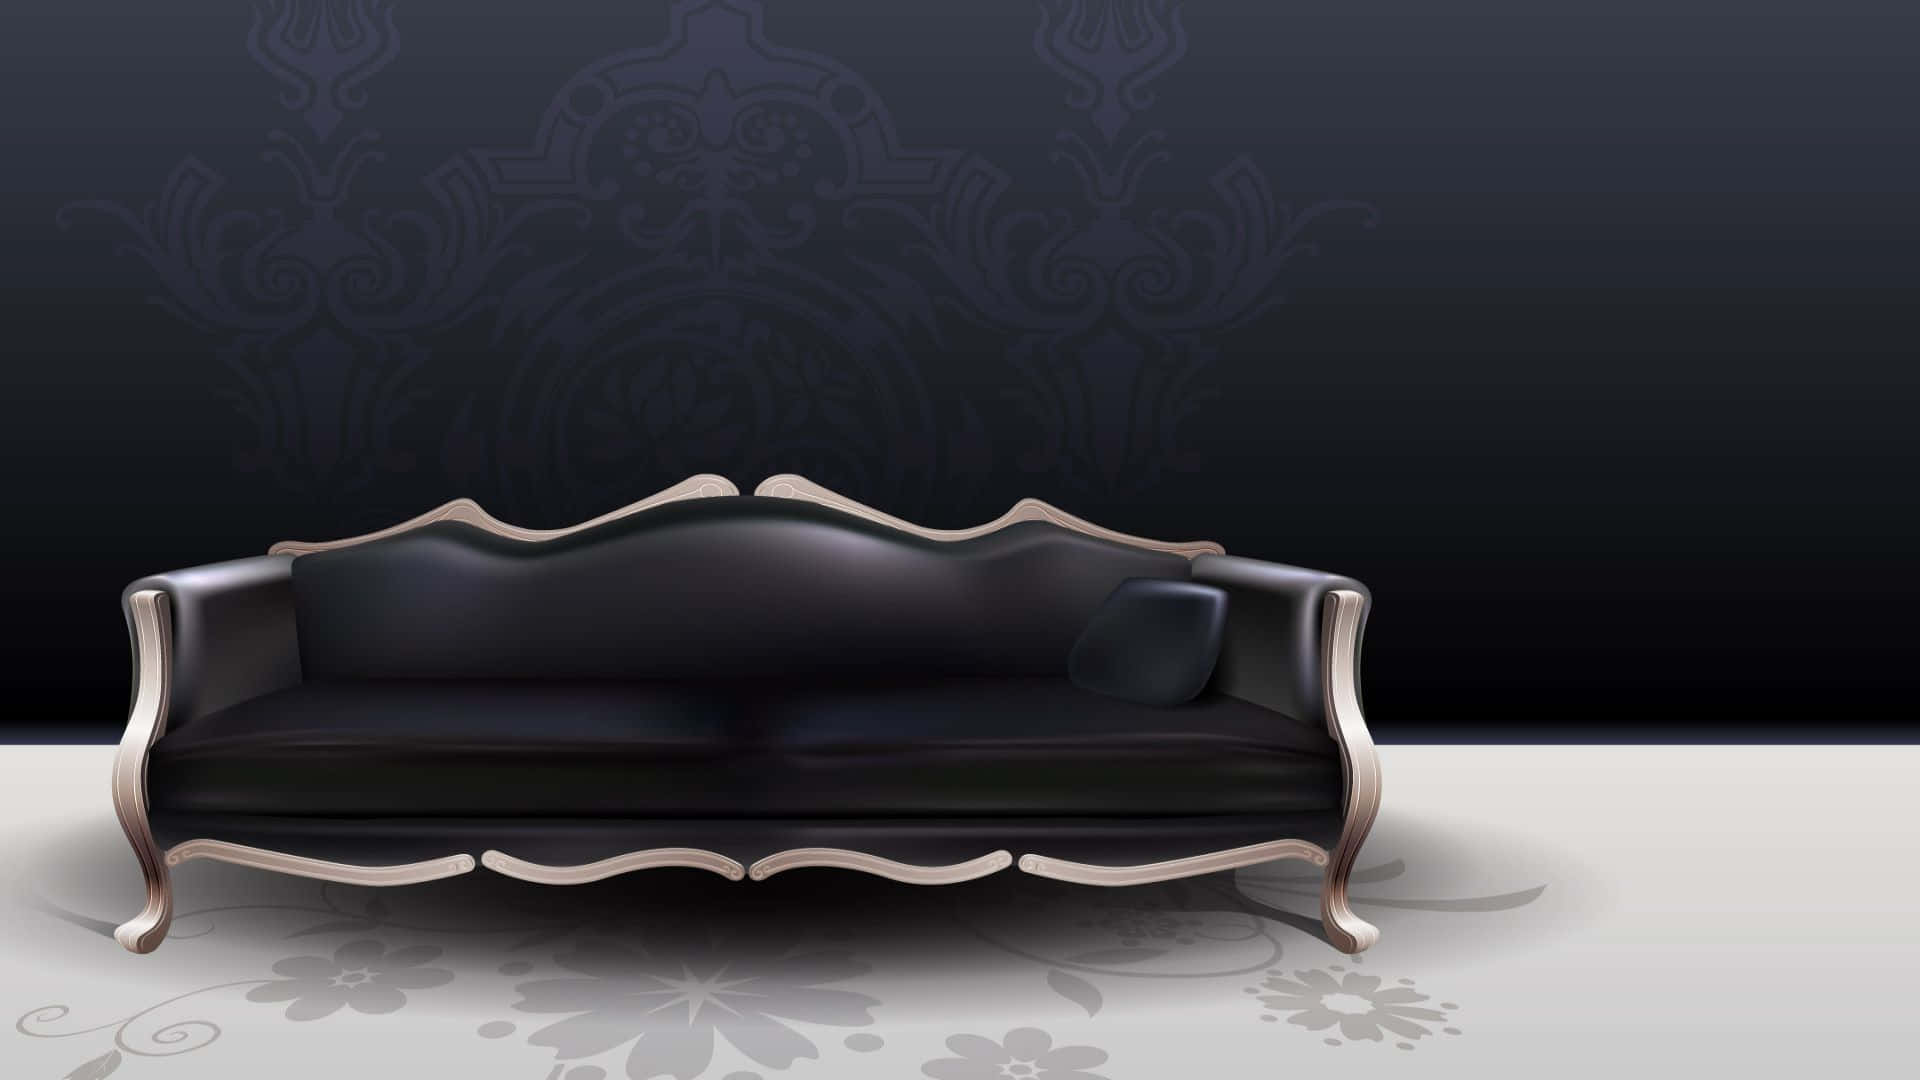 Couch 1920 X 1080 Wallpaper